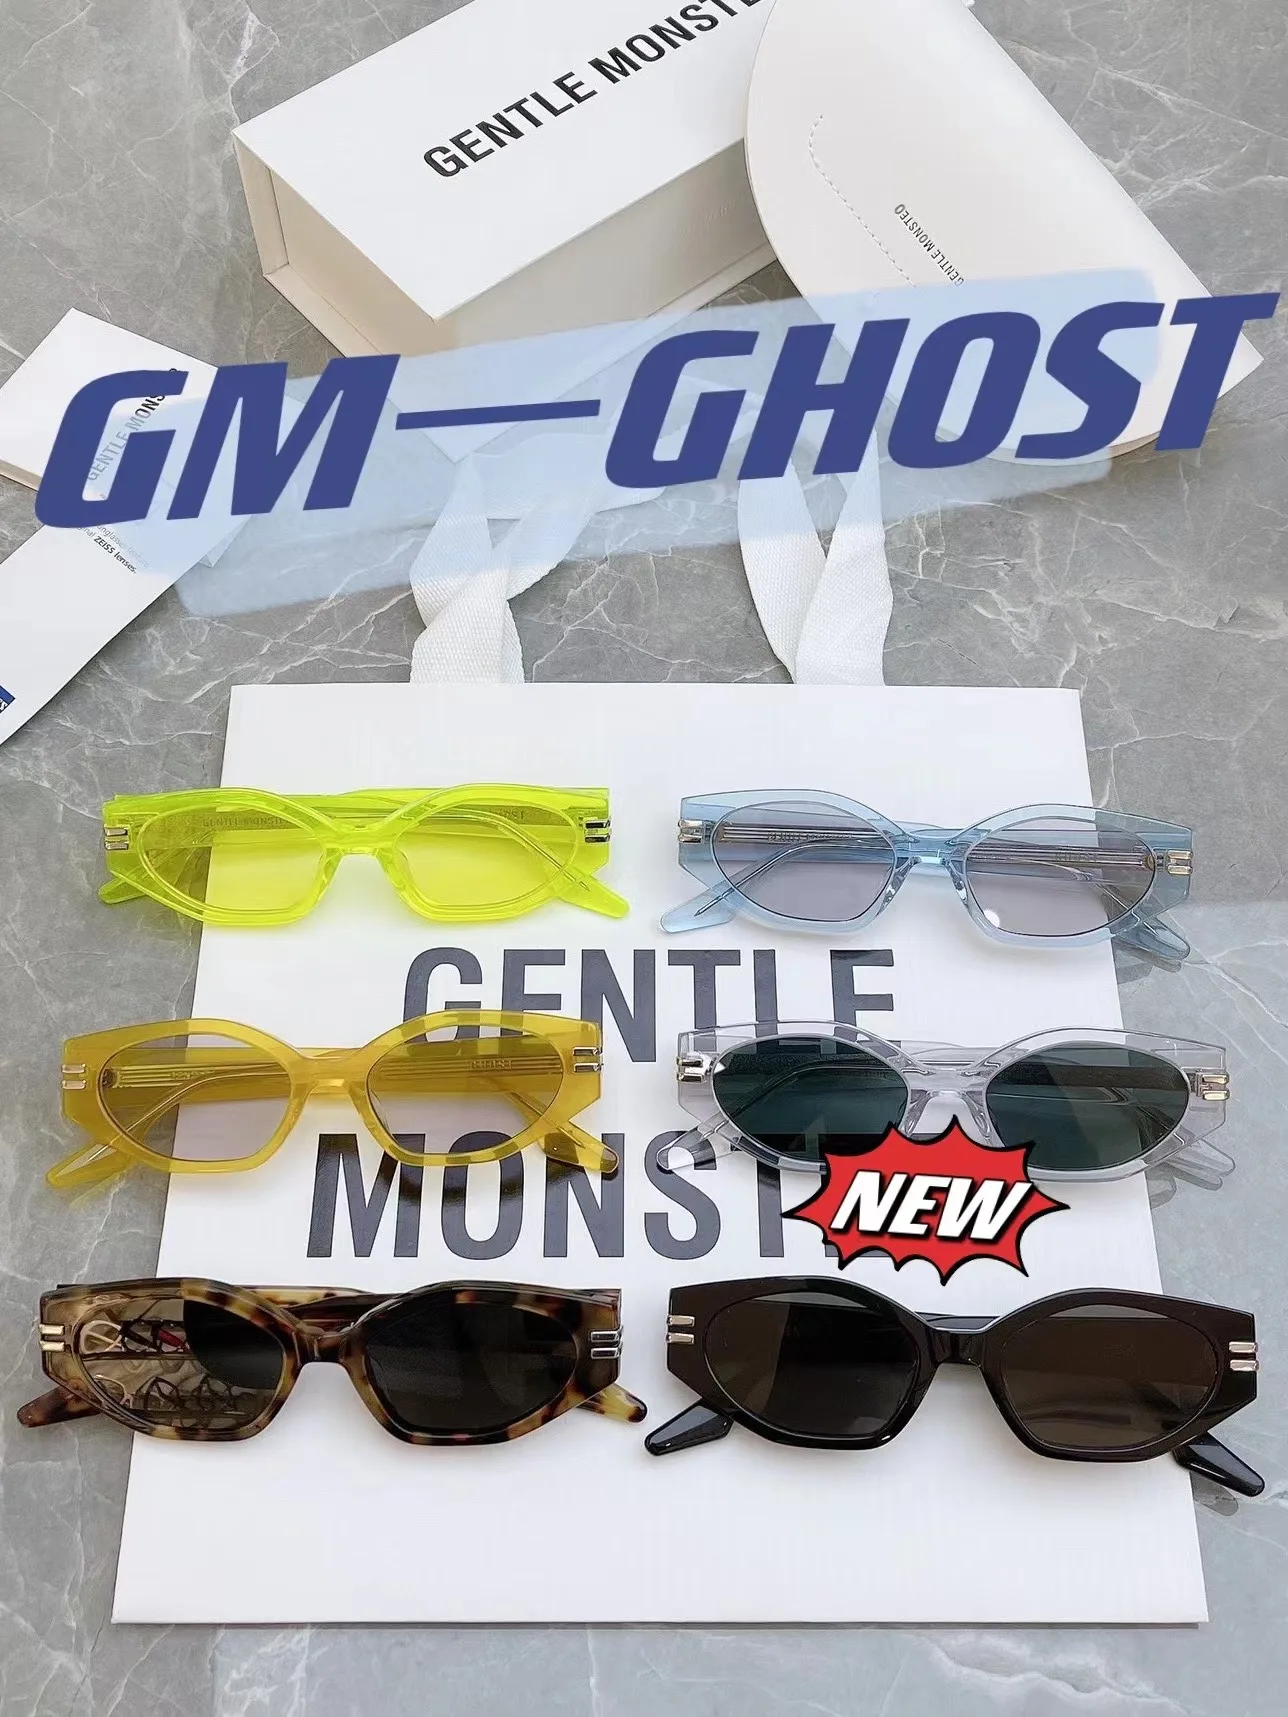 

2022 GM Same As Jennie Suitable for Small Face Women Sunglasses GENTLE GHOST MONSTEr Acetate Polarized UV400 Square Women Sungla